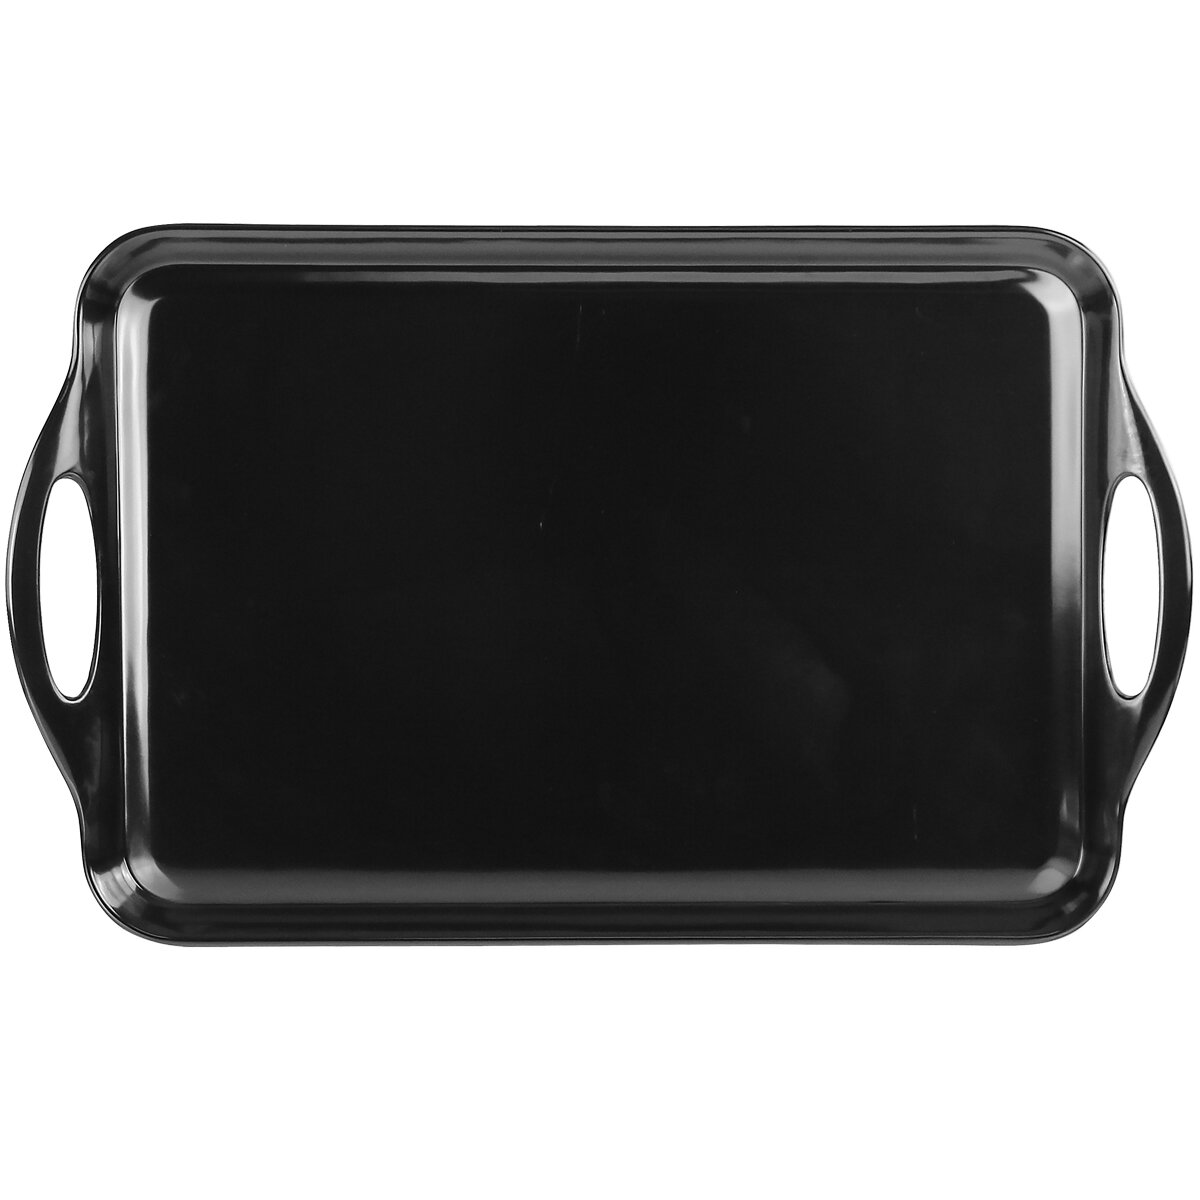 Winco Easy Hold Oval Tray, 22-Inch by 27-Inch, Black